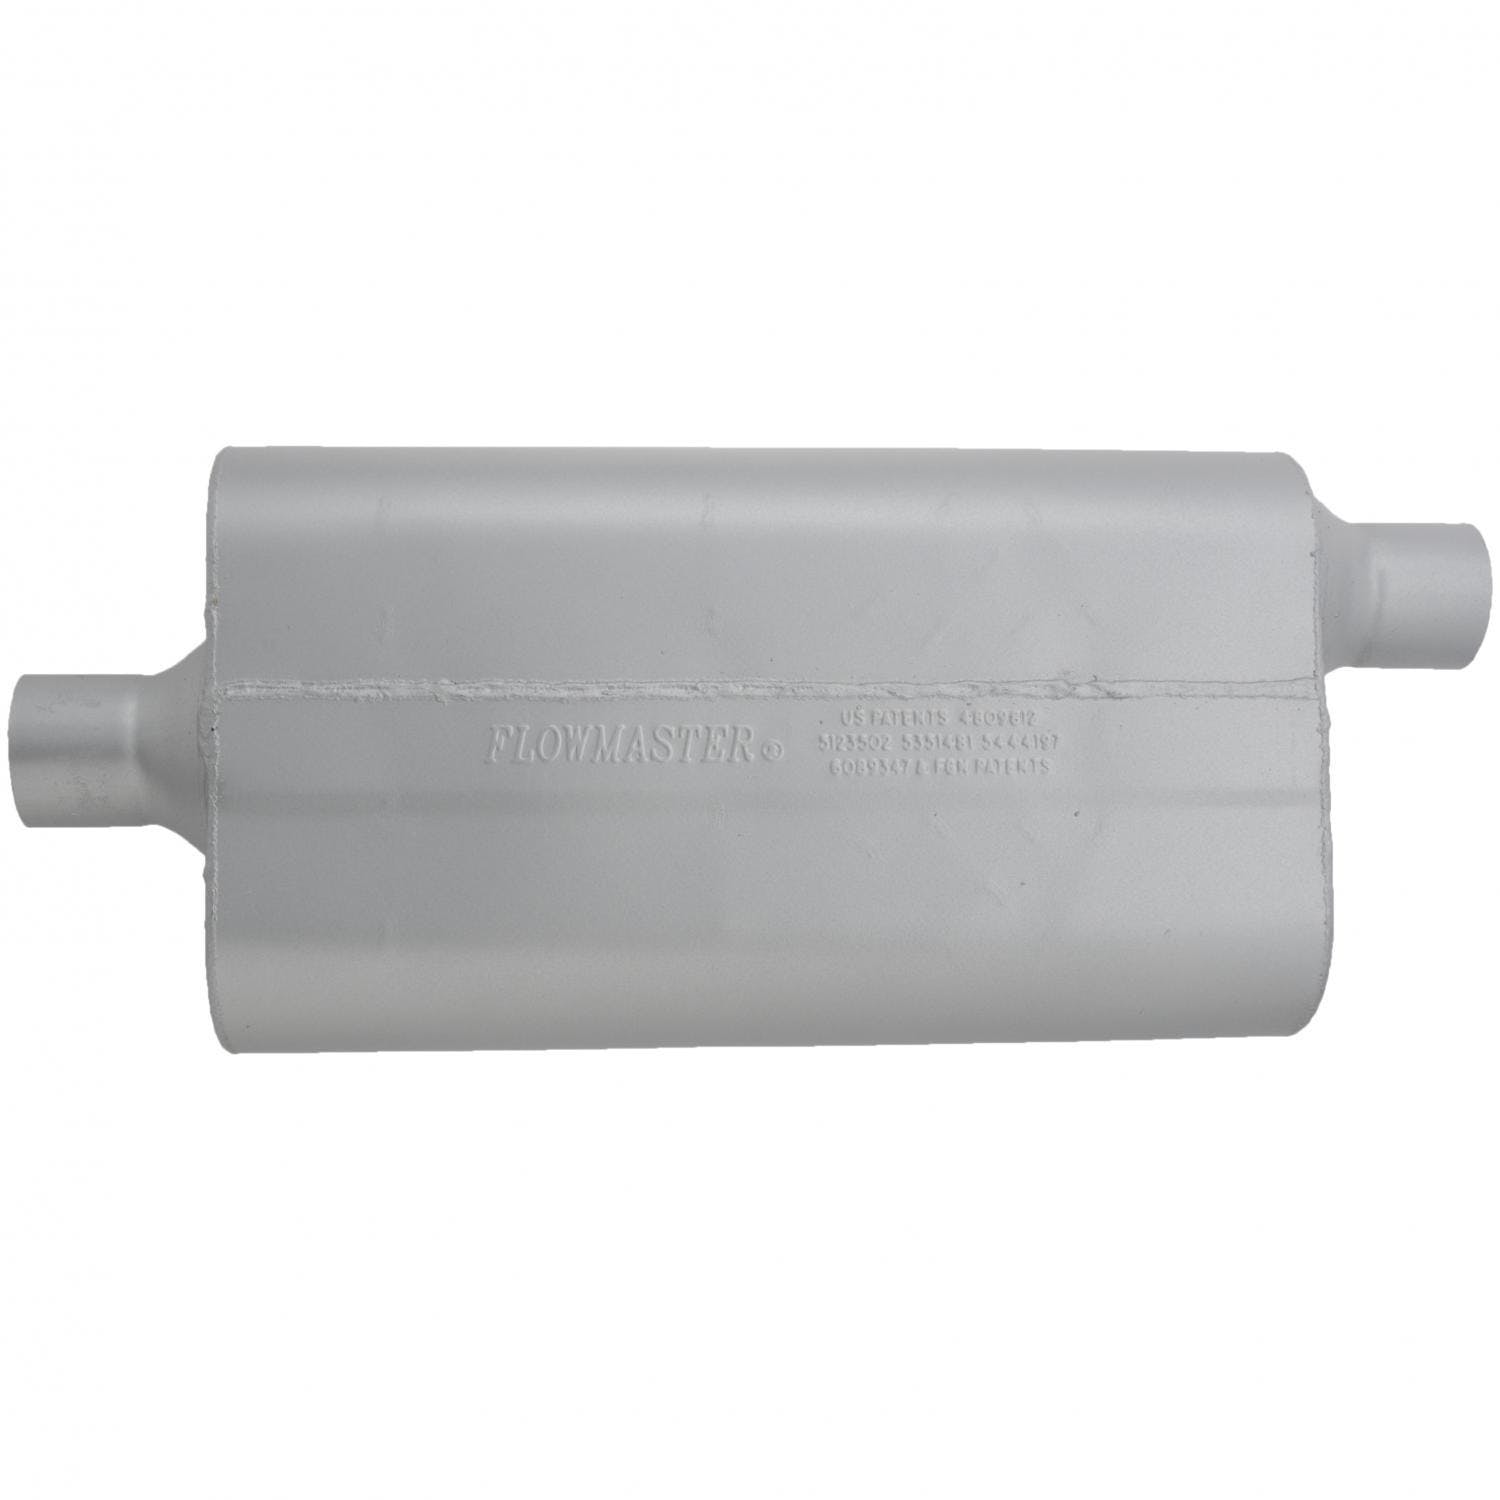 Flowmaster 942452 2.25IN(C)/OUT(O) 50 SERIES DF